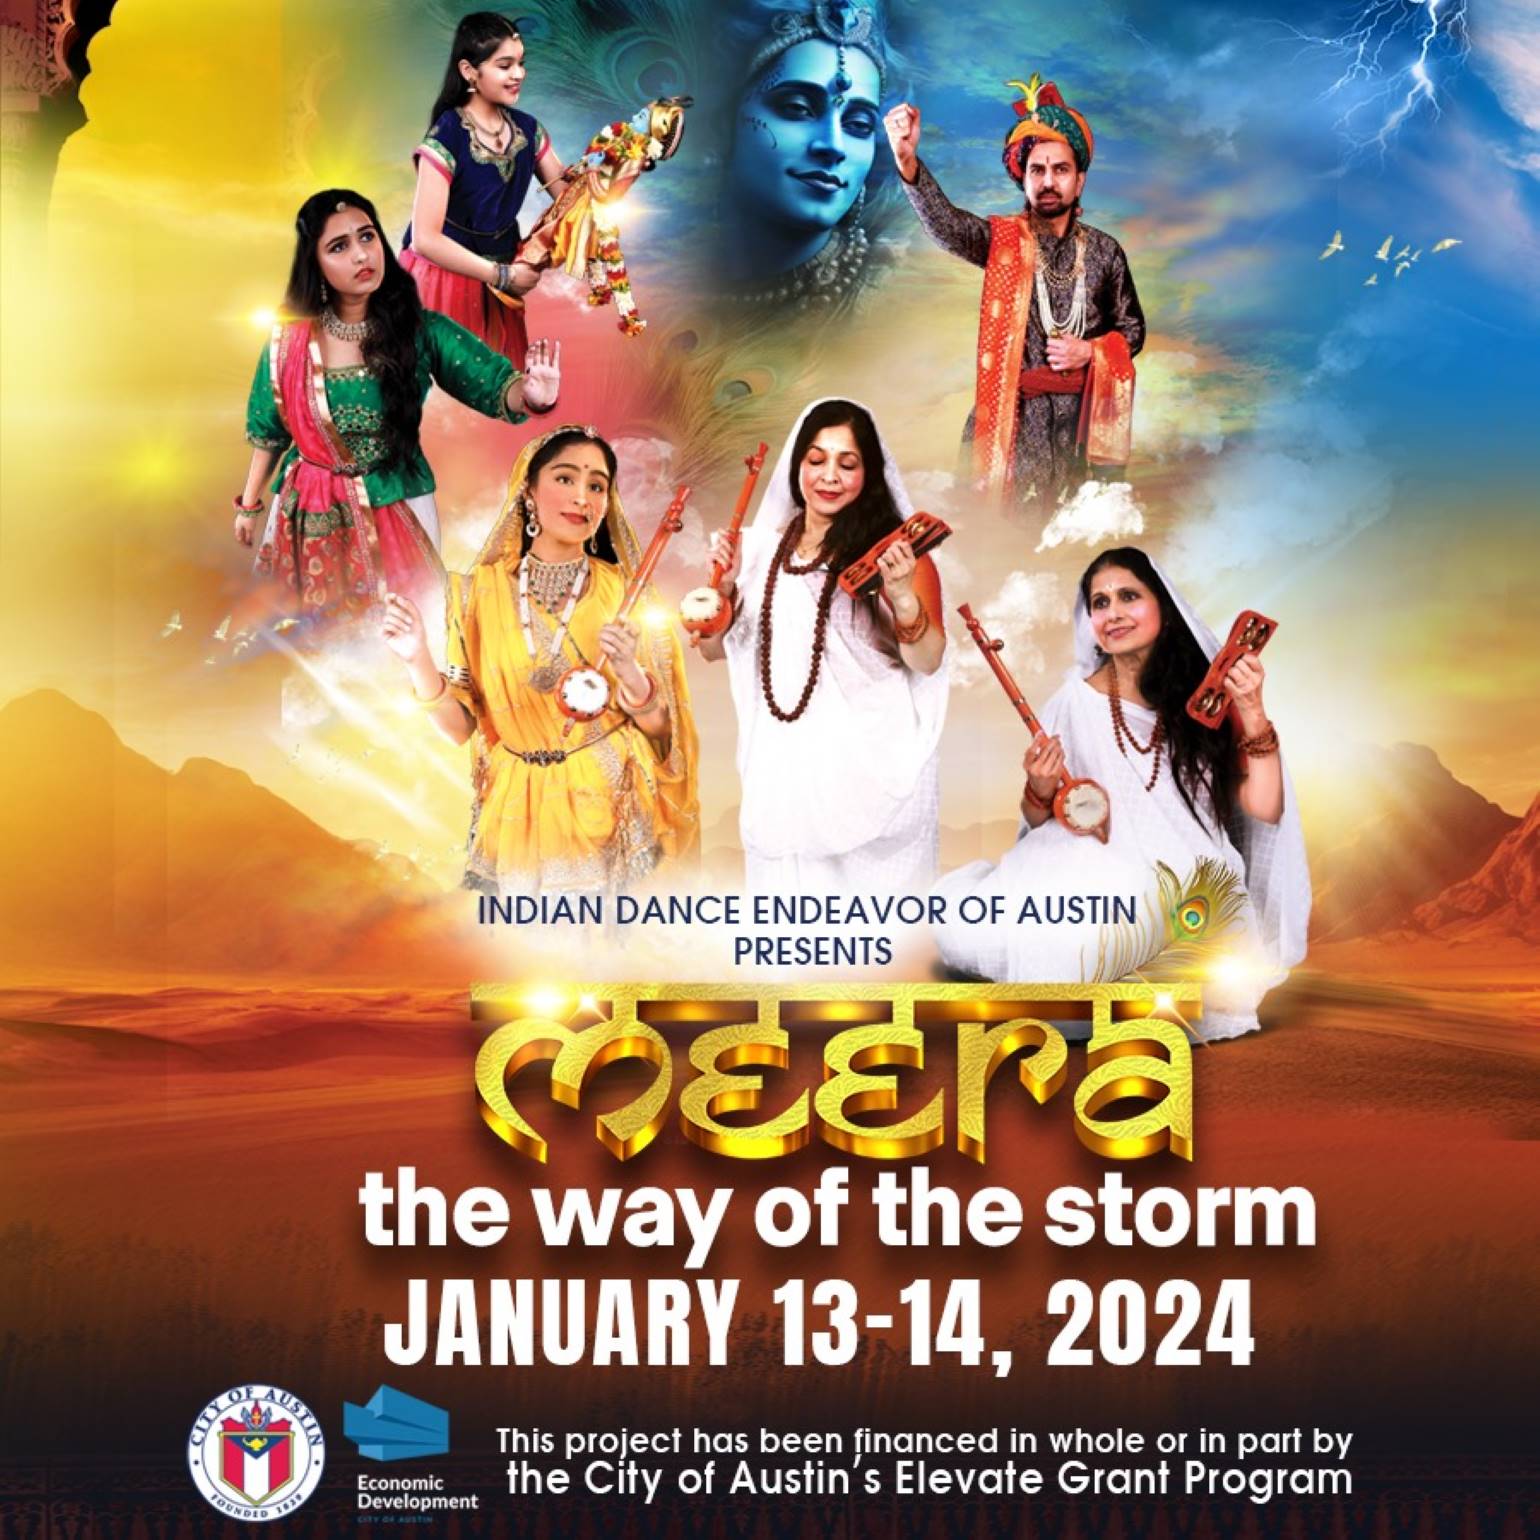 Meera, the Way of the Storm by Indian Dance Endeavor of Austin